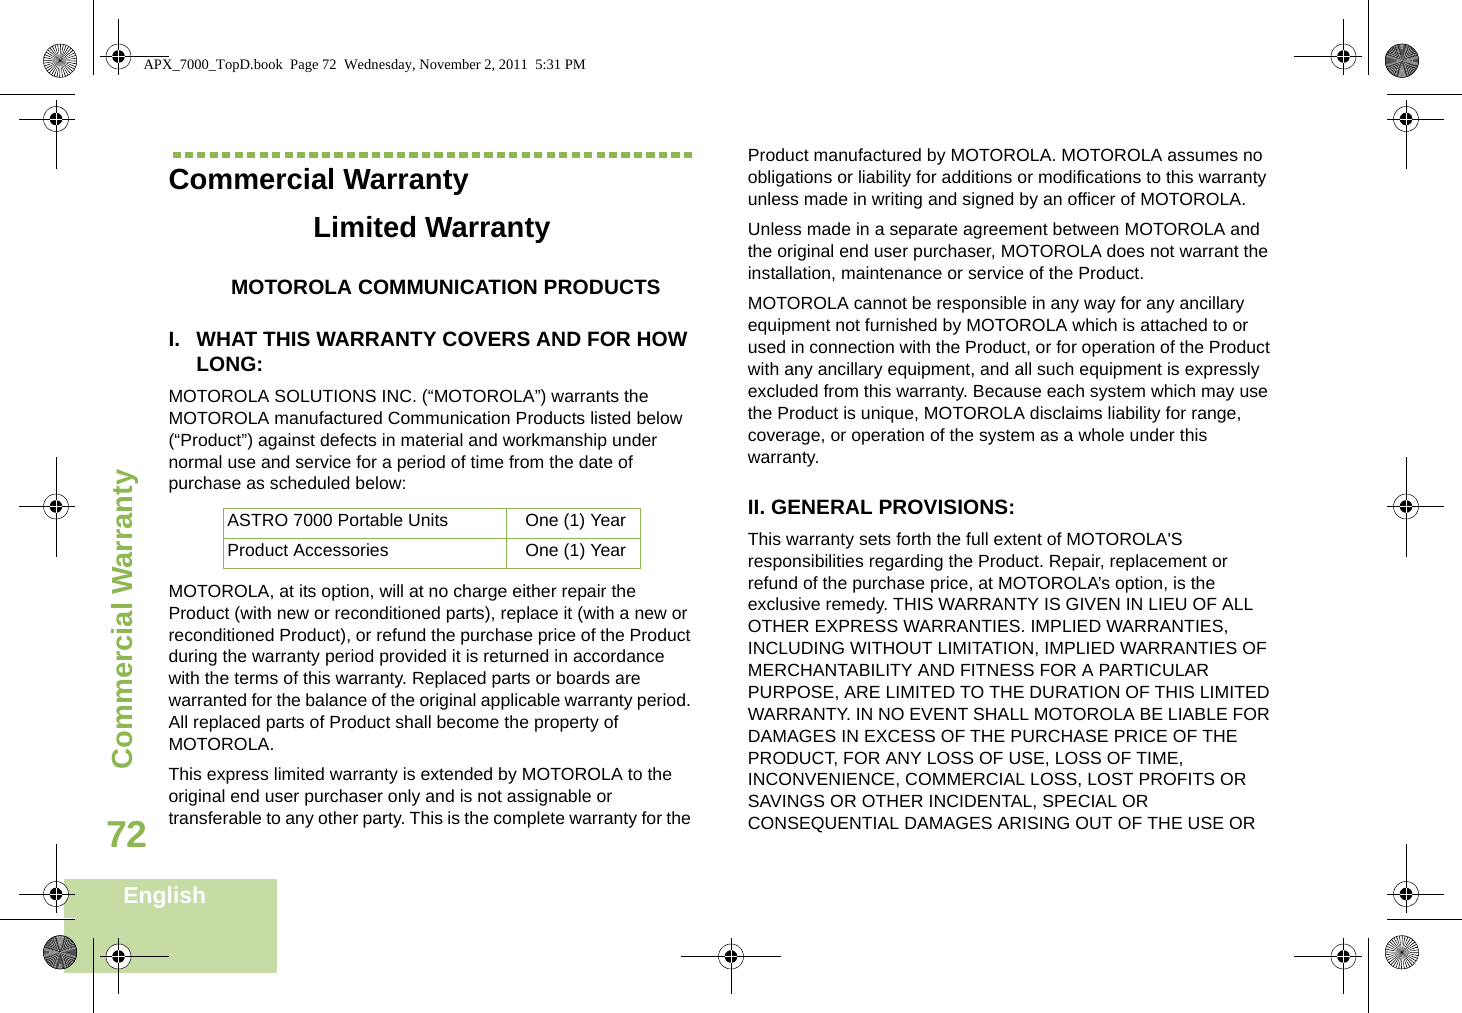 Commercial WarrantyEnglish72Commercial WarrantyLimited WarrantyMOTOROLA COMMUNICATION PRODUCTSI. WHAT THIS WARRANTY COVERS AND FOR HOW LONG:MOTOROLA SOLUTIONS INC. (“MOTOROLA”) warrants the MOTOROLA manufactured Communication Products listed below (“Product”) against defects in material and workmanship under normal use and service for a period of time from the date of purchase as scheduled below:MOTOROLA, at its option, will at no charge either repair the Product (with new or reconditioned parts), replace it (with a new or reconditioned Product), or refund the purchase price of the Product during the warranty period provided it is returned in accordance with the terms of this warranty. Replaced parts or boards are warranted for the balance of the original applicable warranty period. All replaced parts of Product shall become the property of MOTOROLA.This express limited warranty is extended by MOTOROLA to the original end user purchaser only and is not assignable or transferable to any other party. This is the complete warranty for the Product manufactured by MOTOROLA. MOTOROLA assumes no obligations or liability for additions or modifications to this warranty unless made in writing and signed by an officer of MOTOROLA. Unless made in a separate agreement between MOTOROLA and the original end user purchaser, MOTOROLA does not warrant the installation, maintenance or service of the Product.MOTOROLA cannot be responsible in any way for any ancillary equipment not furnished by MOTOROLA which is attached to or used in connection with the Product, or for operation of the Product with any ancillary equipment, and all such equipment is expressly excluded from this warranty. Because each system which may use the Product is unique, MOTOROLA disclaims liability for range, coverage, or operation of the system as a whole under this warranty.II. GENERAL PROVISIONS:This warranty sets forth the full extent of MOTOROLA&apos;S responsibilities regarding the Product. Repair, replacement or refund of the purchase price, at MOTOROLA’s option, is the exclusive remedy. THIS WARRANTY IS GIVEN IN LIEU OF ALL OTHER EXPRESS WARRANTIES. IMPLIED WARRANTIES, INCLUDING WITHOUT LIMITATION, IMPLIED WARRANTIES OF MERCHANTABILITY AND FITNESS FOR A PARTICULAR PURPOSE, ARE LIMITED TO THE DURATION OF THIS LIMITED WARRANTY. IN NO EVENT SHALL MOTOROLA BE LIABLE FOR DAMAGES IN EXCESS OF THE PURCHASE PRICE OF THE PRODUCT, FOR ANY LOSS OF USE, LOSS OF TIME, INCONVENIENCE, COMMERCIAL LOSS, LOST PROFITS OR SAVINGS OR OTHER INCIDENTAL, SPECIAL OR CONSEQUENTIAL DAMAGES ARISING OUT OF THE USE OR ASTRO 7000 Portable Units One (1) YearProduct Accessories One (1) YearAPX_7000_TopD.book  Page 72  Wednesday, November 2, 2011  5:31 PM